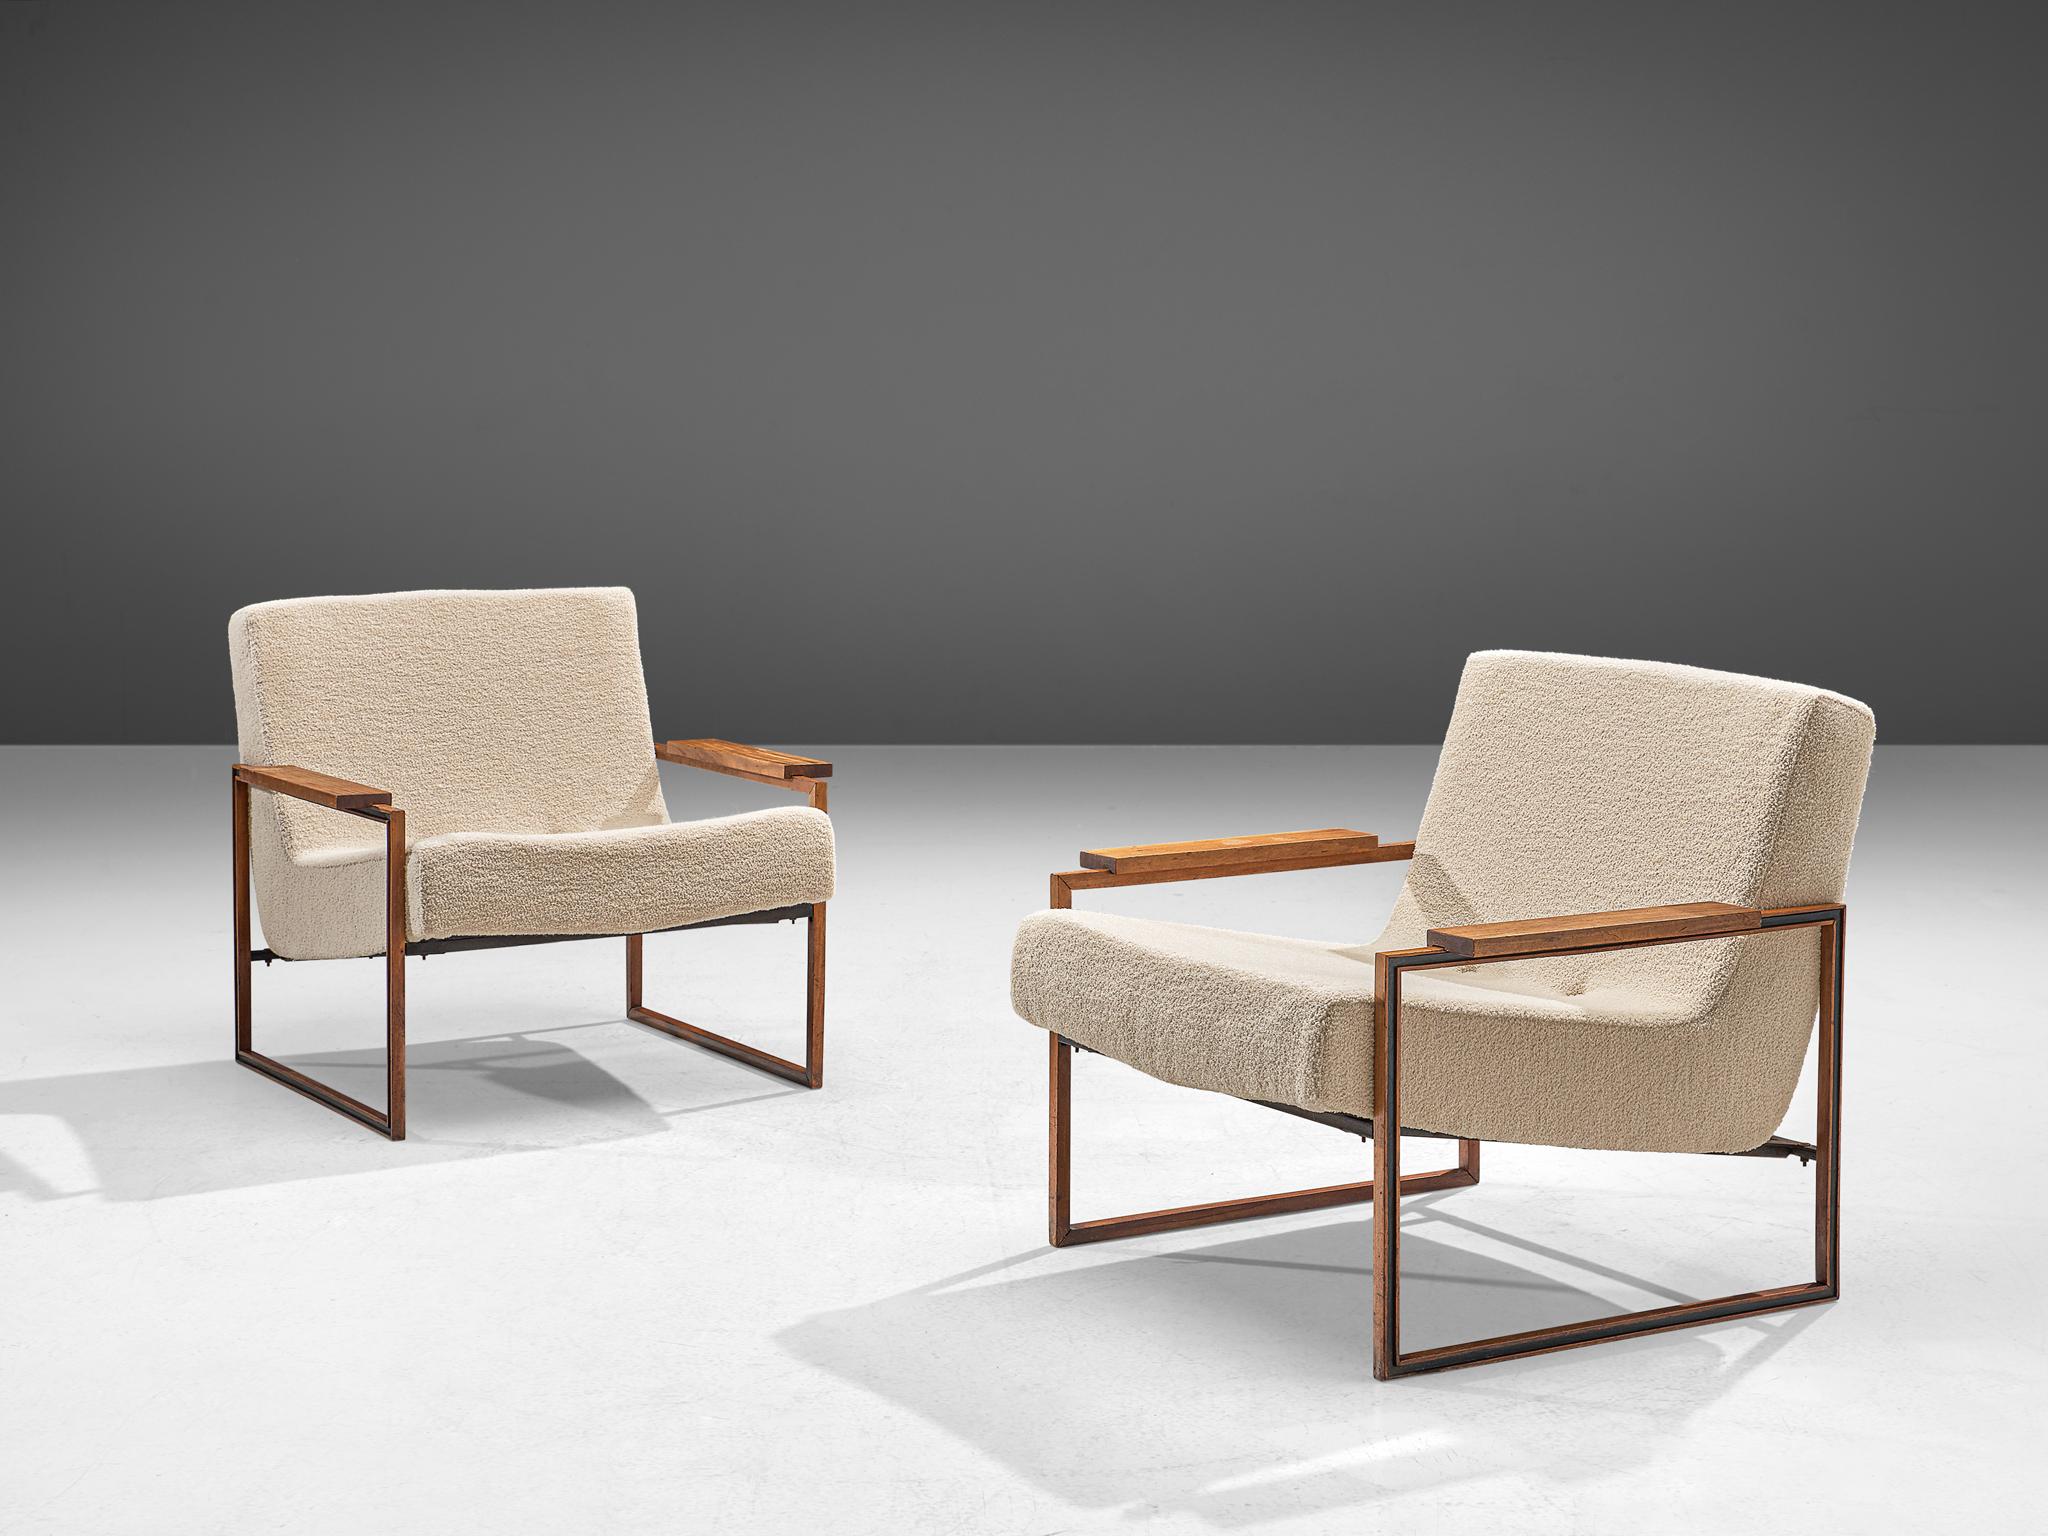 Percival Lafer, pair of armchairs, Brazilian hardwood and fabric, Brazil, 1960.

This stunning pair of Brazilian armchairs are a pair you do not want to miss in your interior. An extraordinary early design of Percival Lafer, featuring a slim,